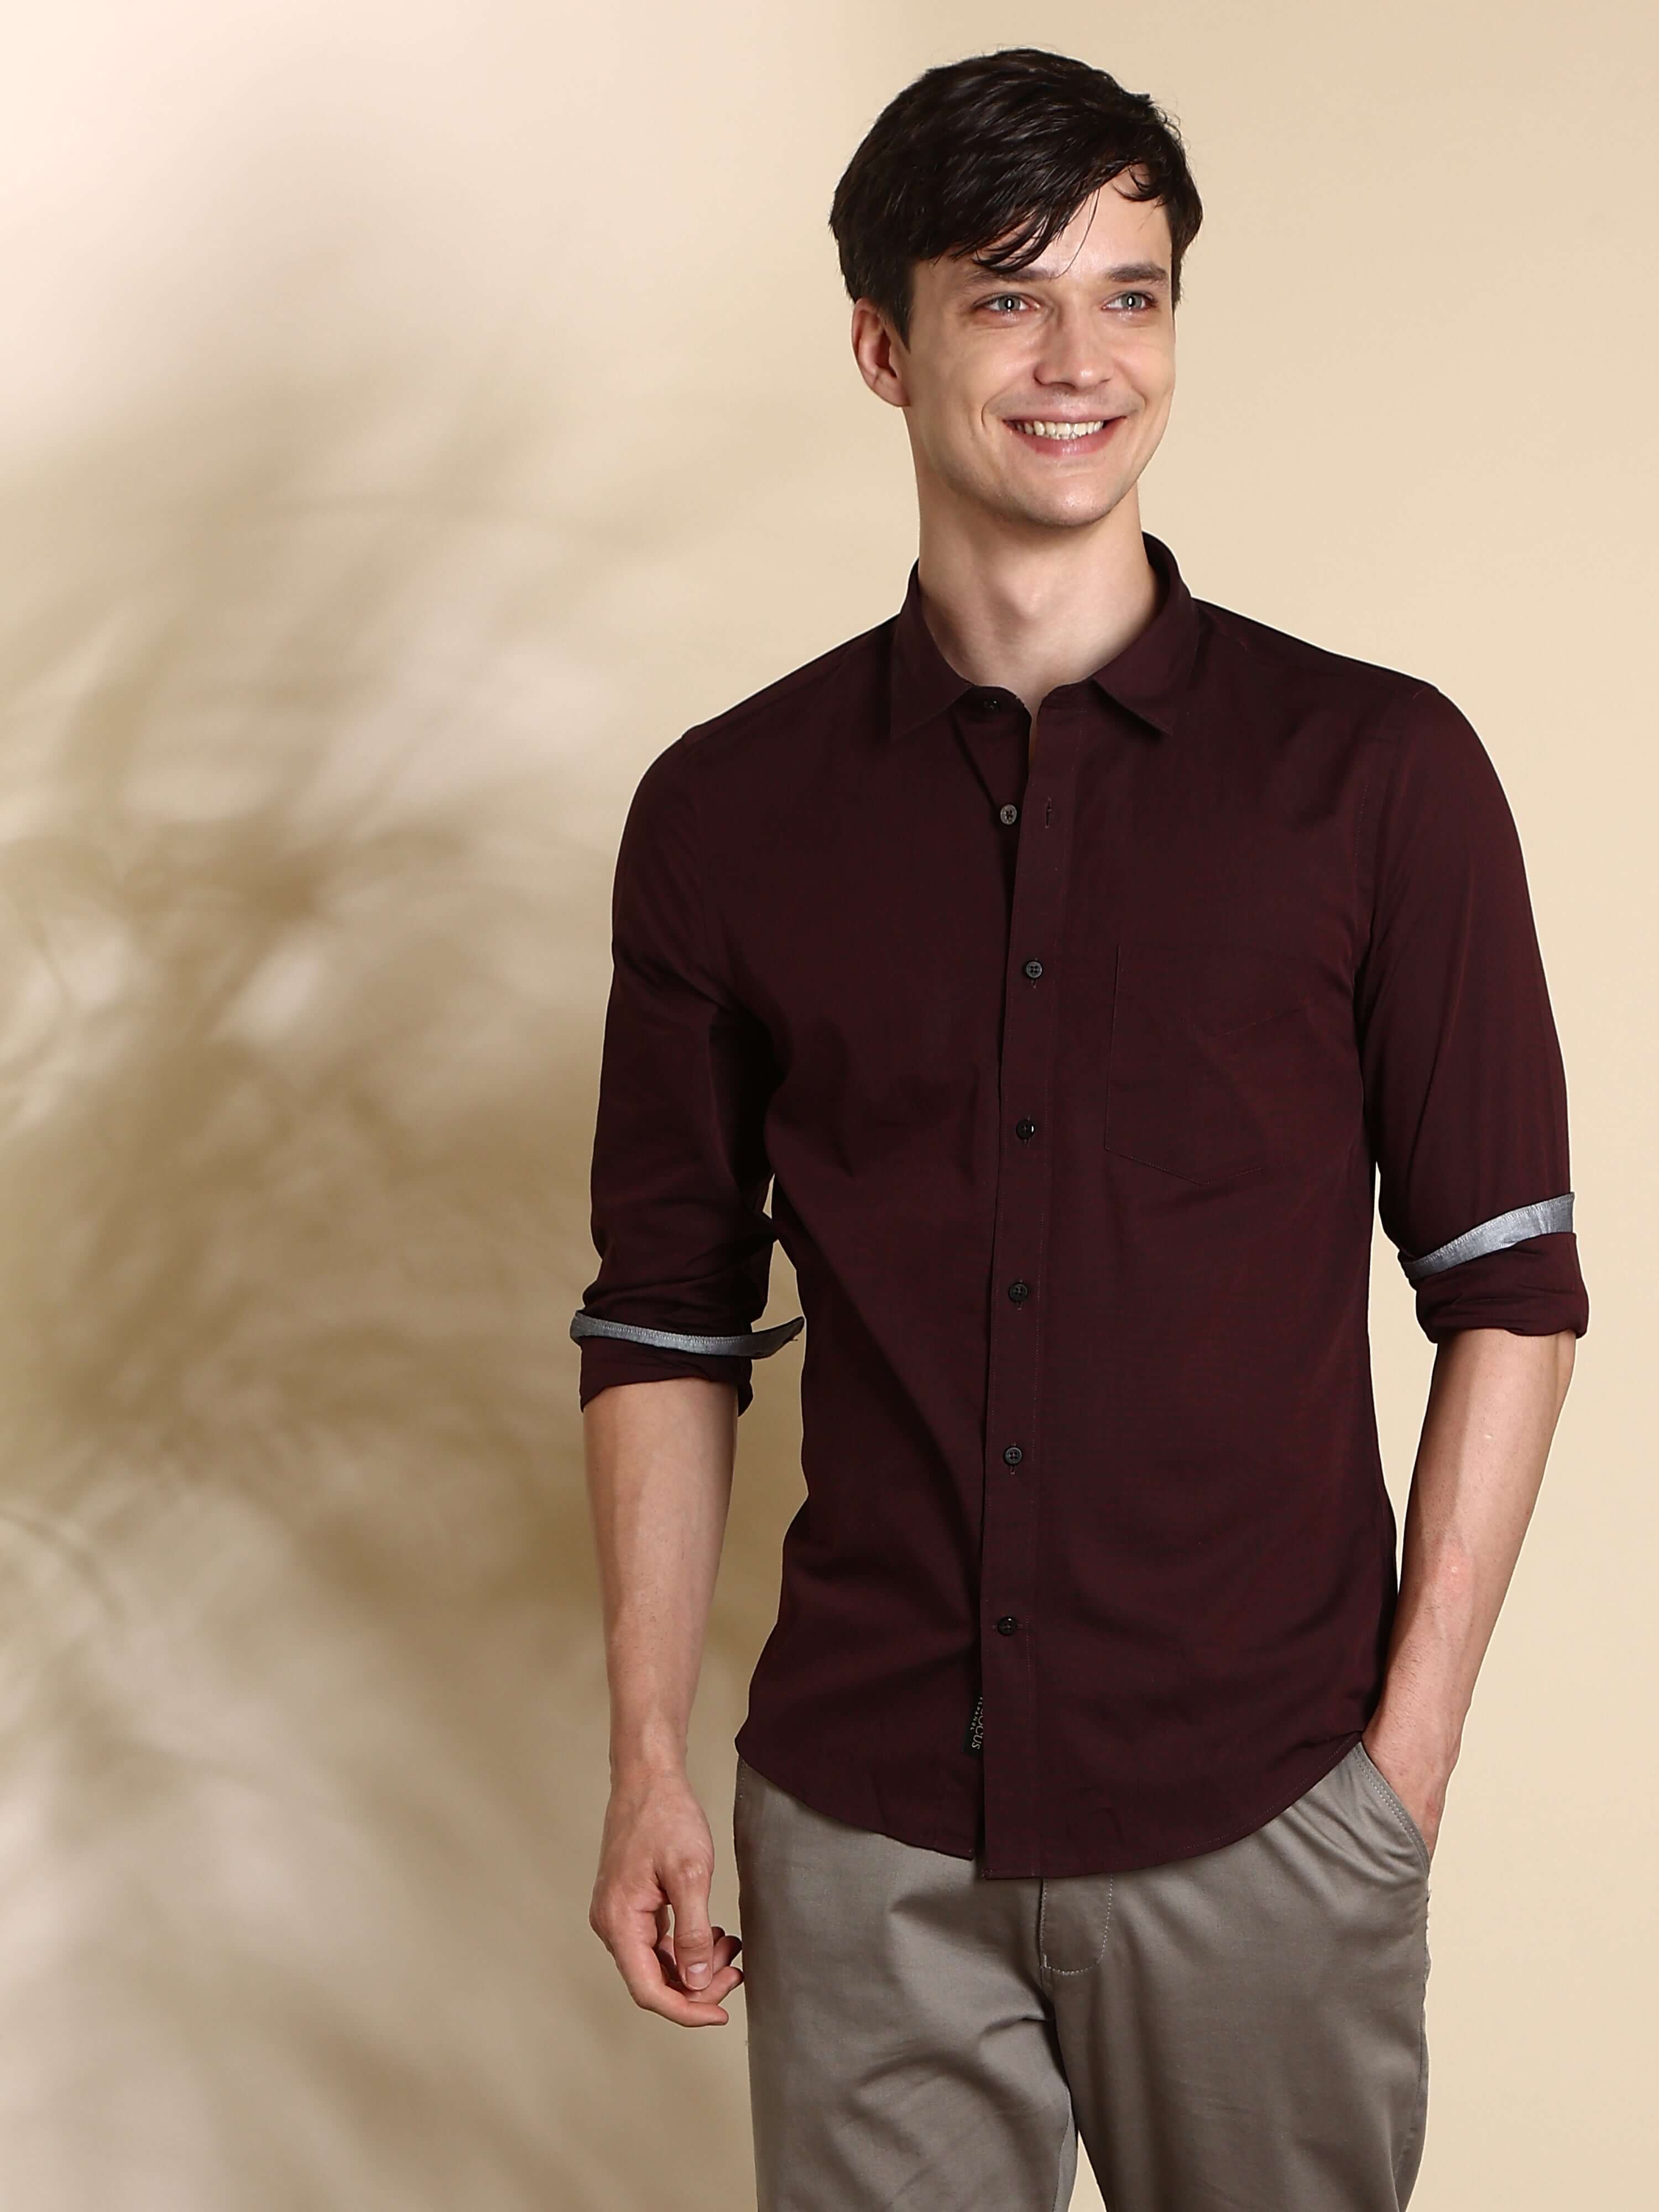 Maroon Solid Casual Full Sleeves Shirt shop online at Estilocus. • 100% premium cotton• Full-sleeve solid shirt• Cut and sew placket• Regular collar• Double button round cuff's.• Double pocket with fine logo embroidery• Cut and sew front panel with high-q